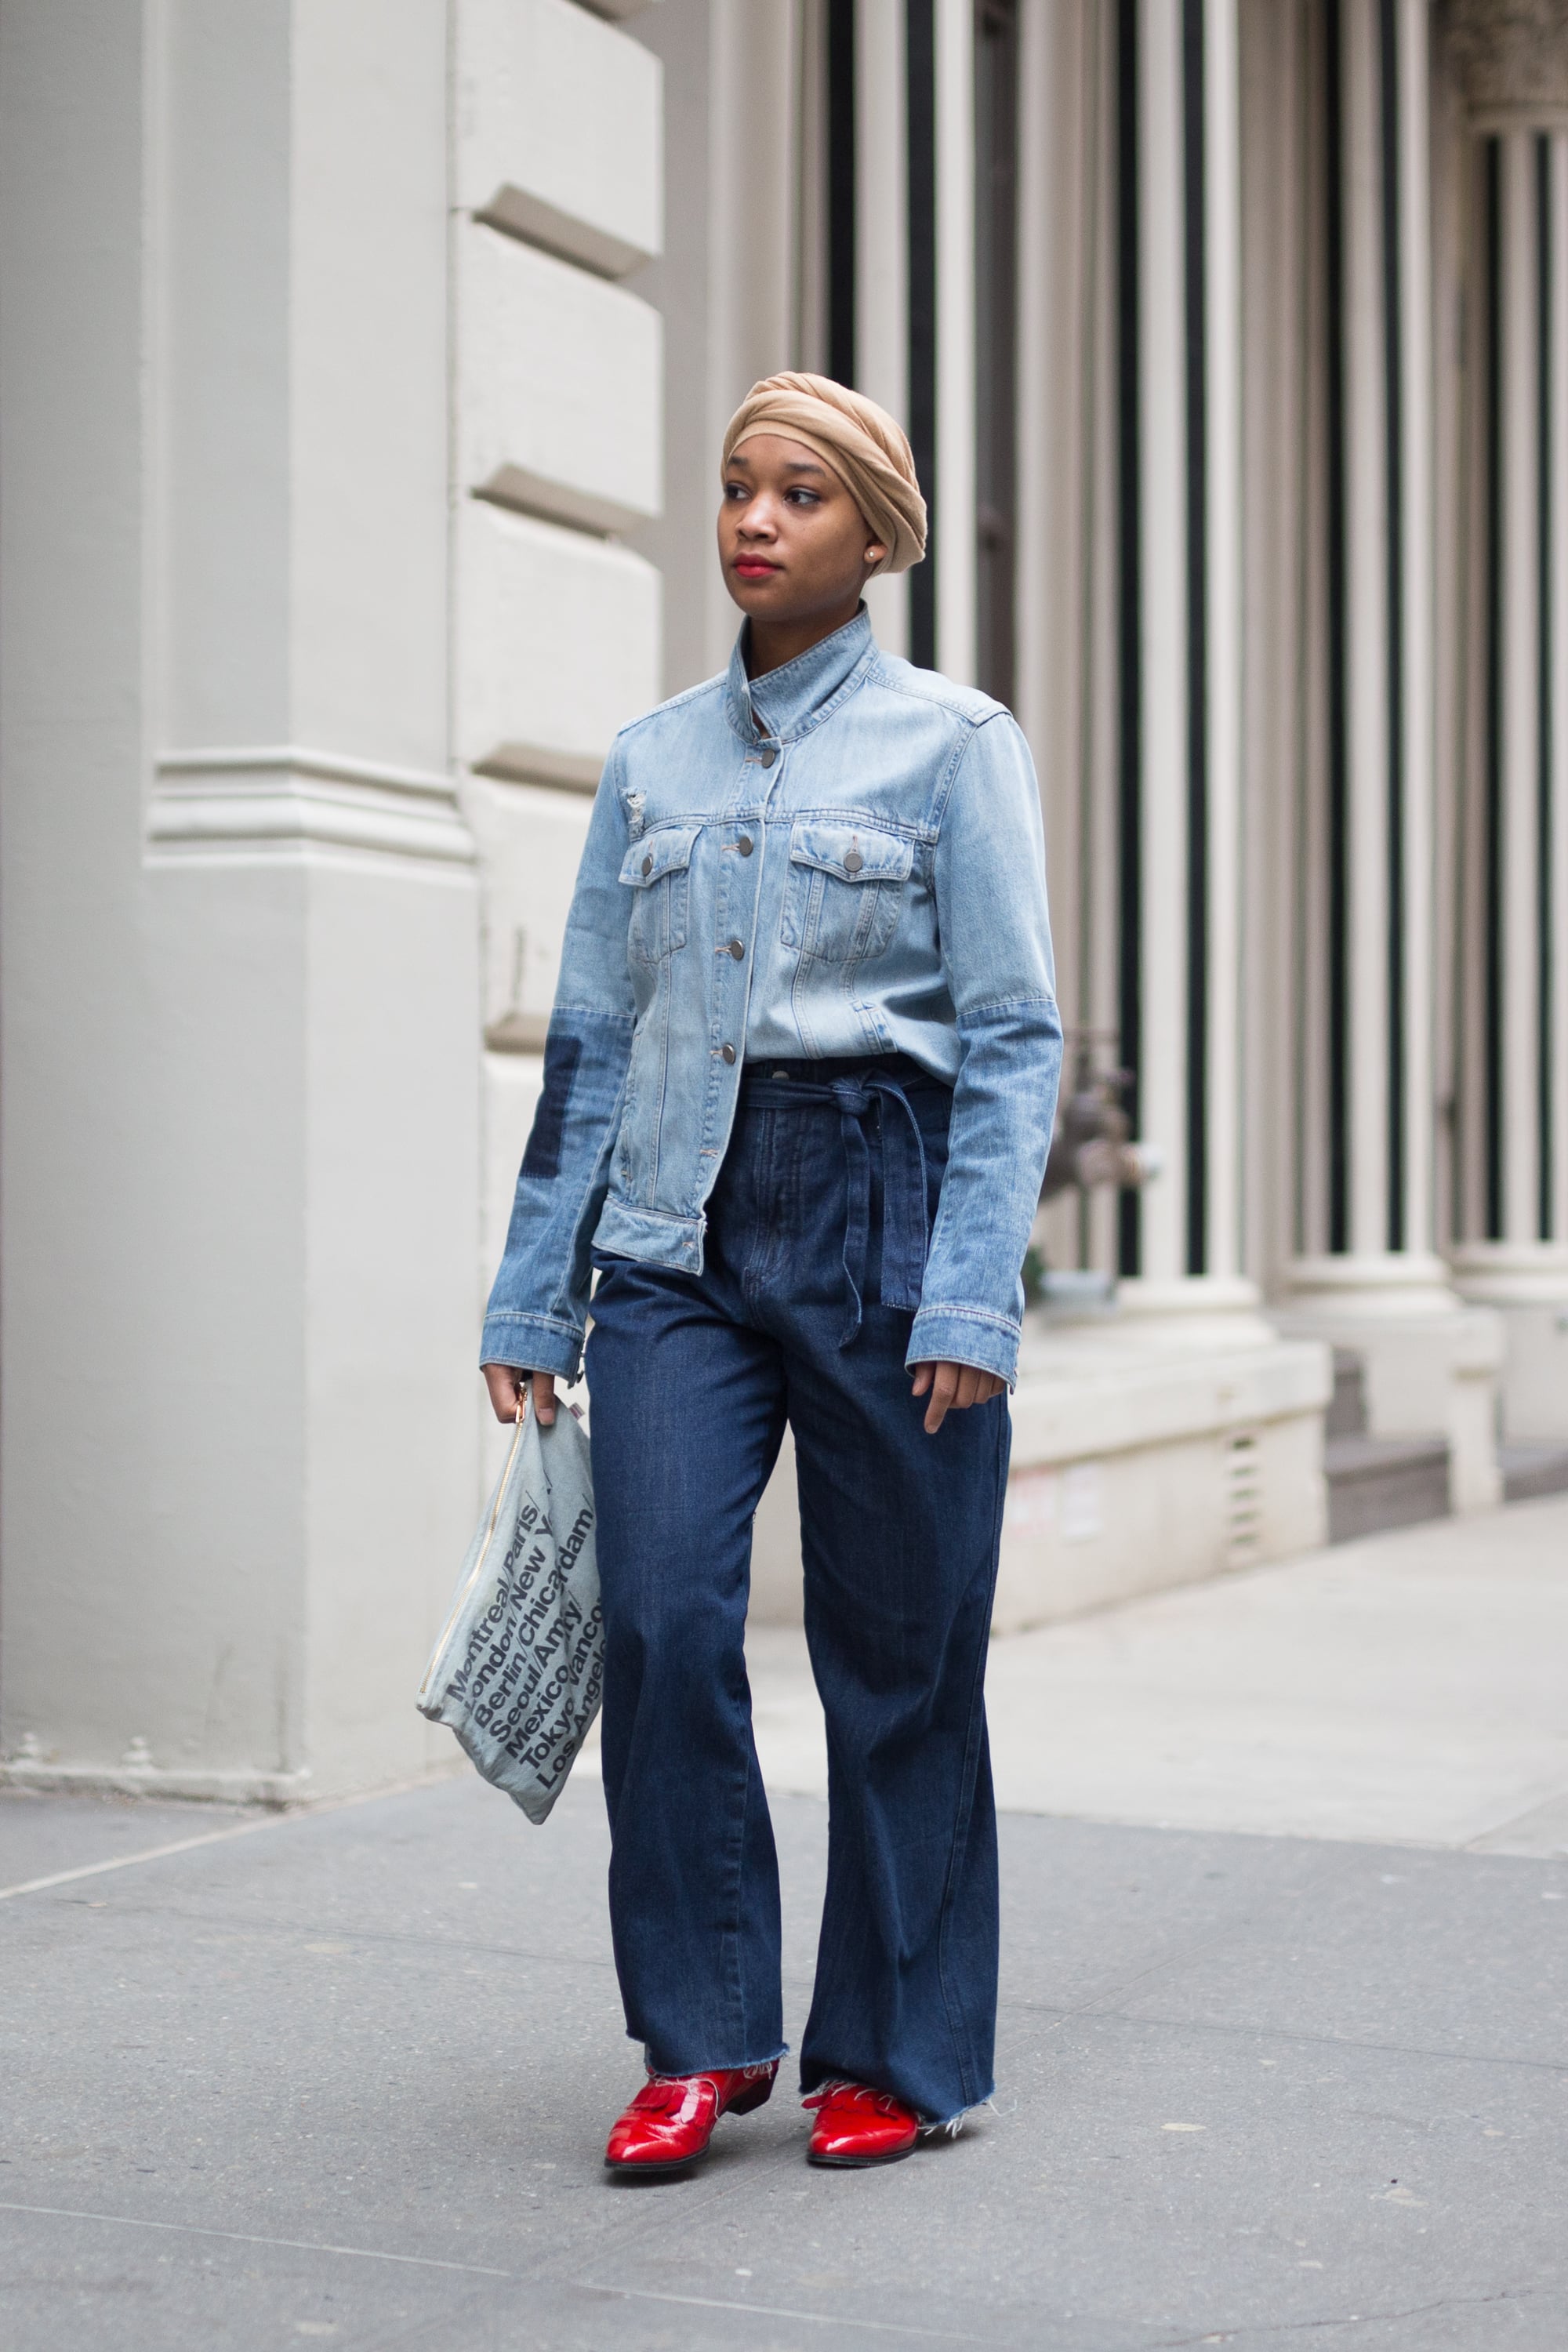 This Is Why You Should Own A Denim Shirt - He Spoke Style